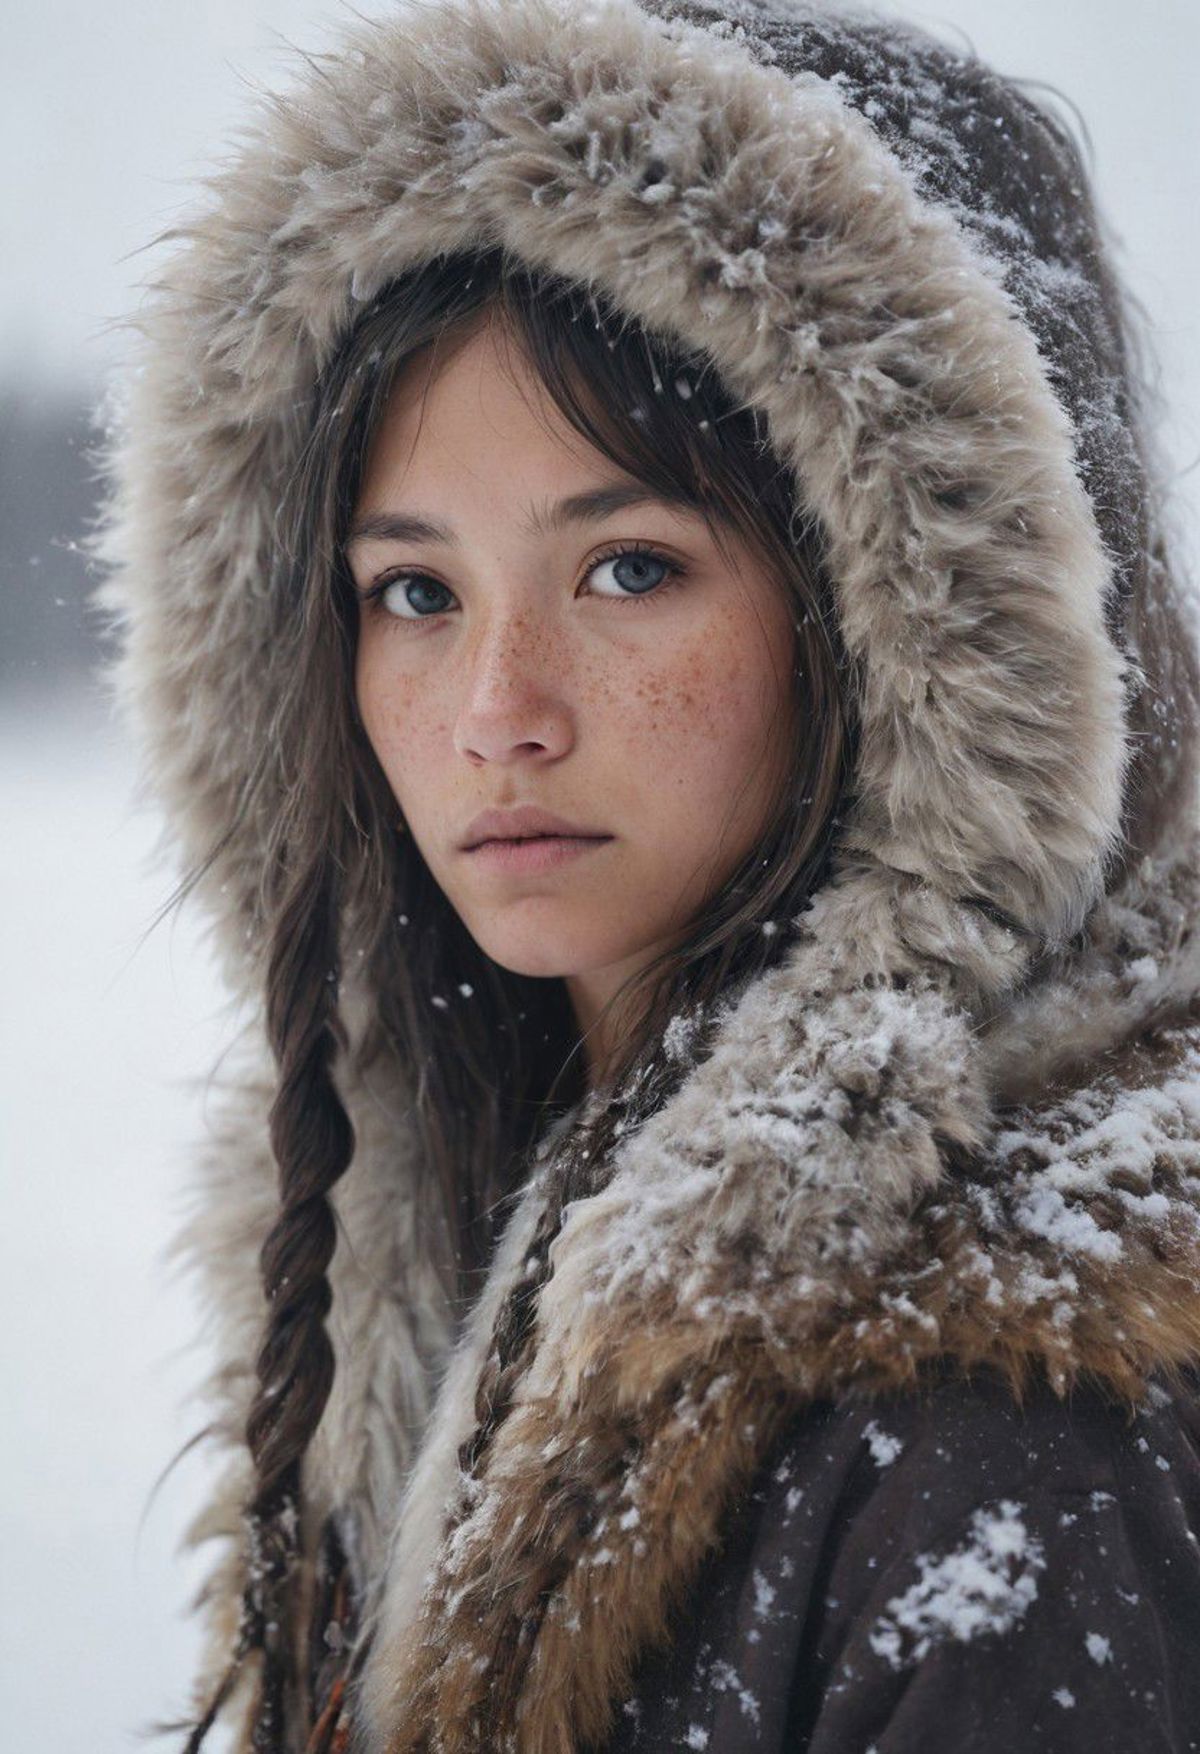 A girl wearing a fur coat with a braid and brown eyes looking into the distance.